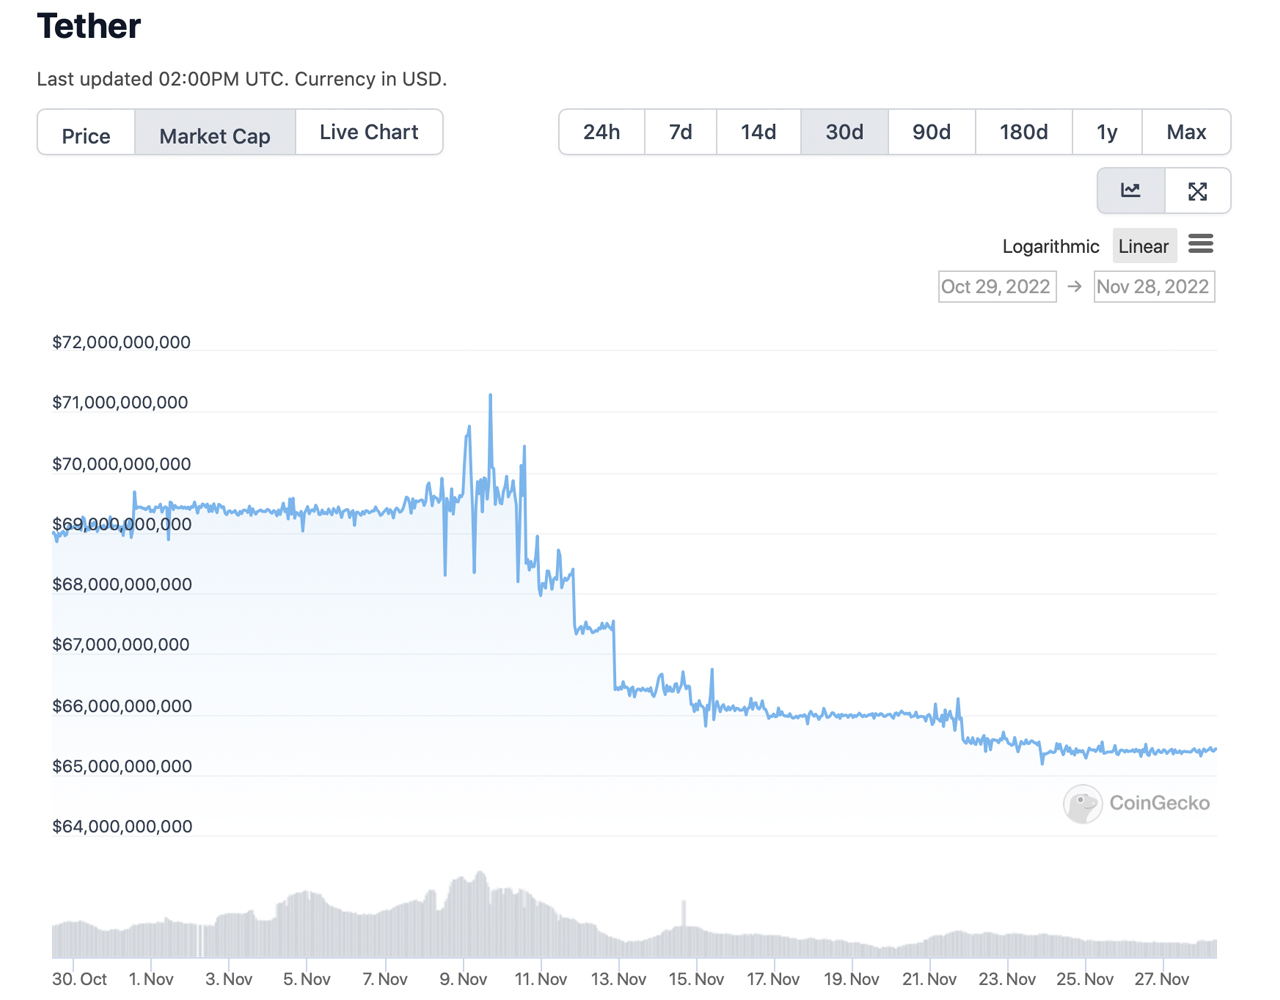 Stablecoin Economy Continues to Shrink Shedding Close to 5% in 2 Months